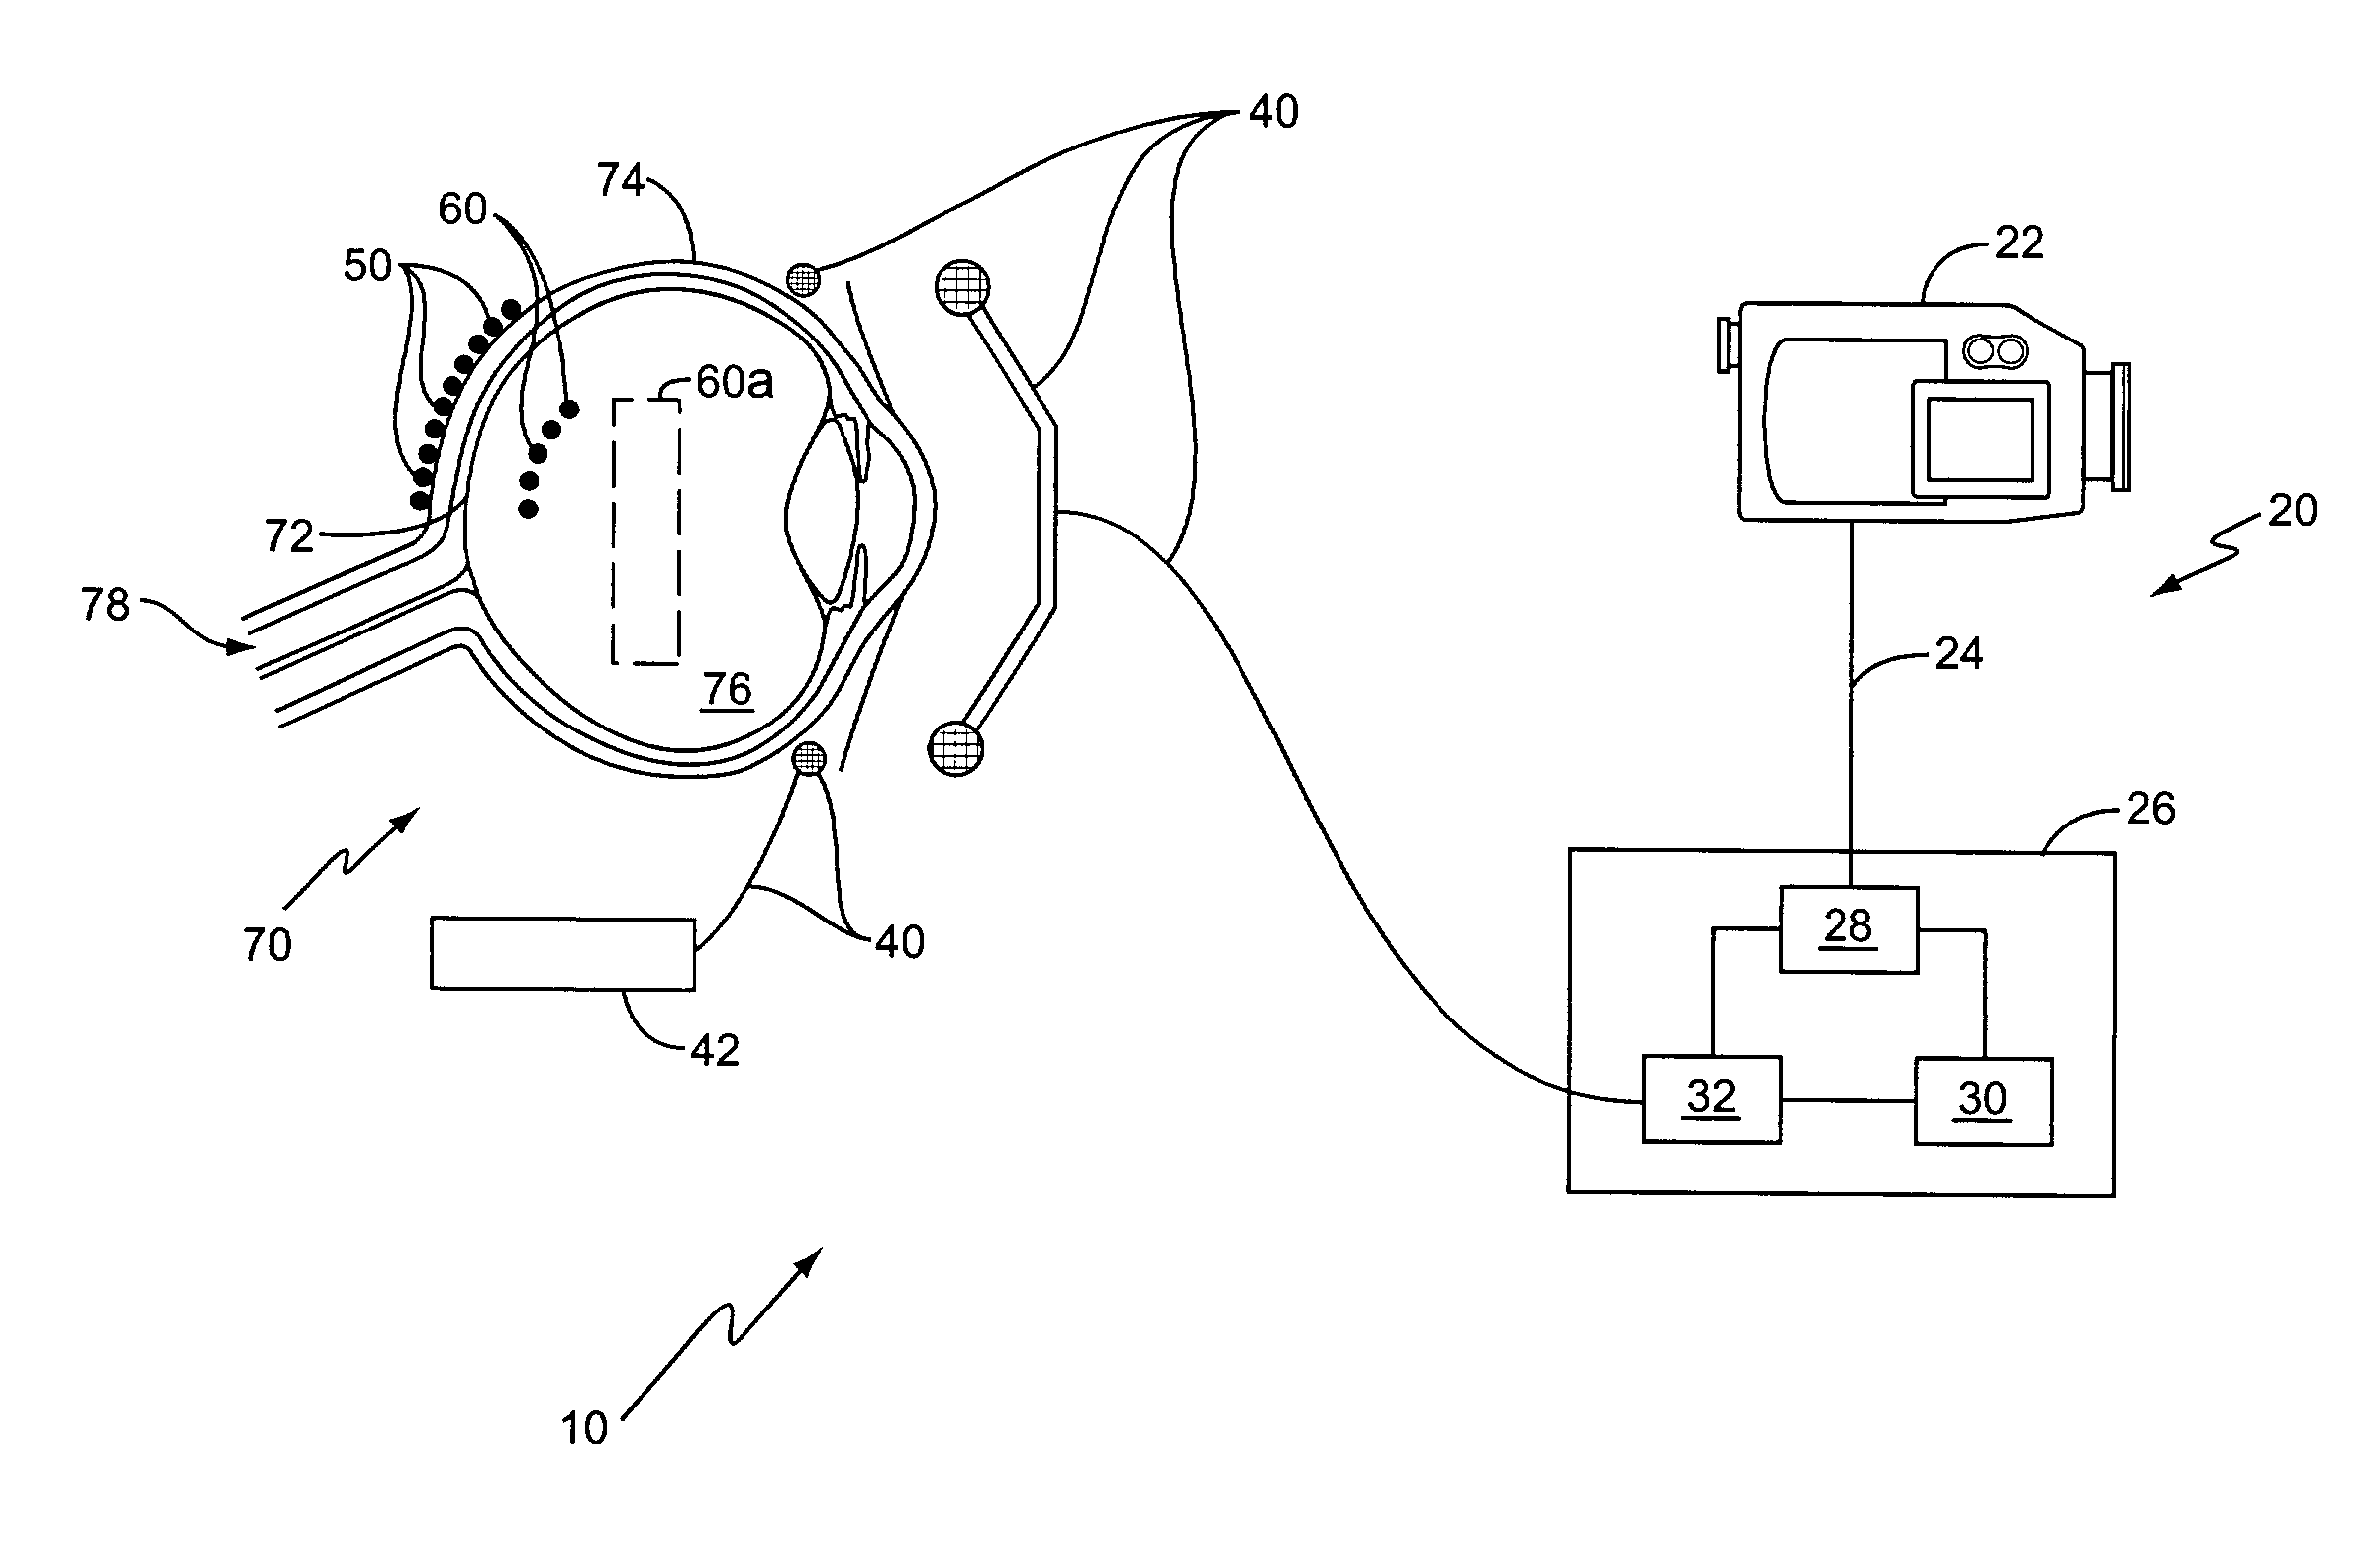 Vision prosthesis for the blind and method for implementing same